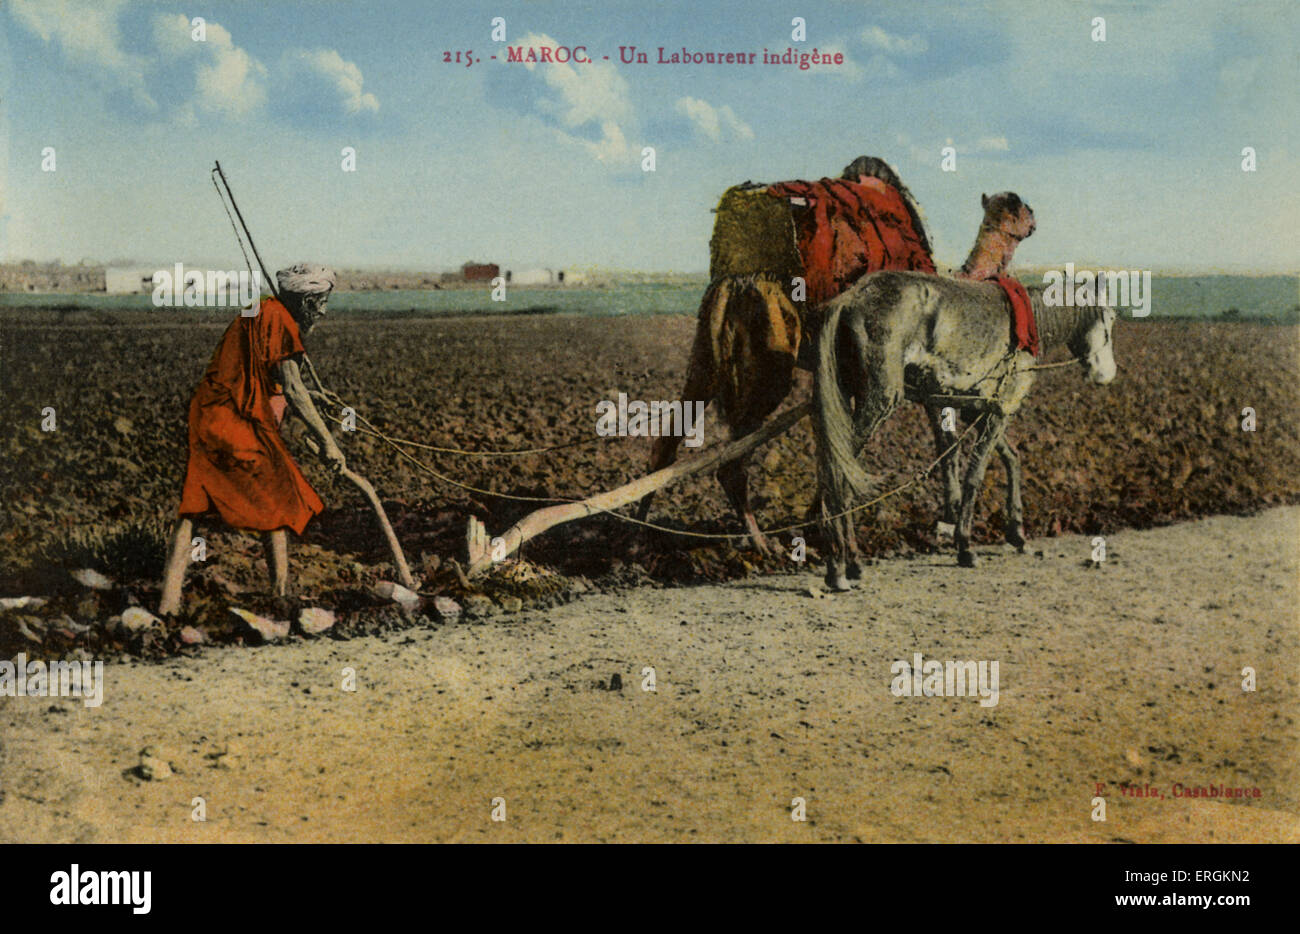 Moroccan plow with donkey and camel. Caption reads: 'Un Labourenur indigene' (an indiginous labourer). Stock Photo